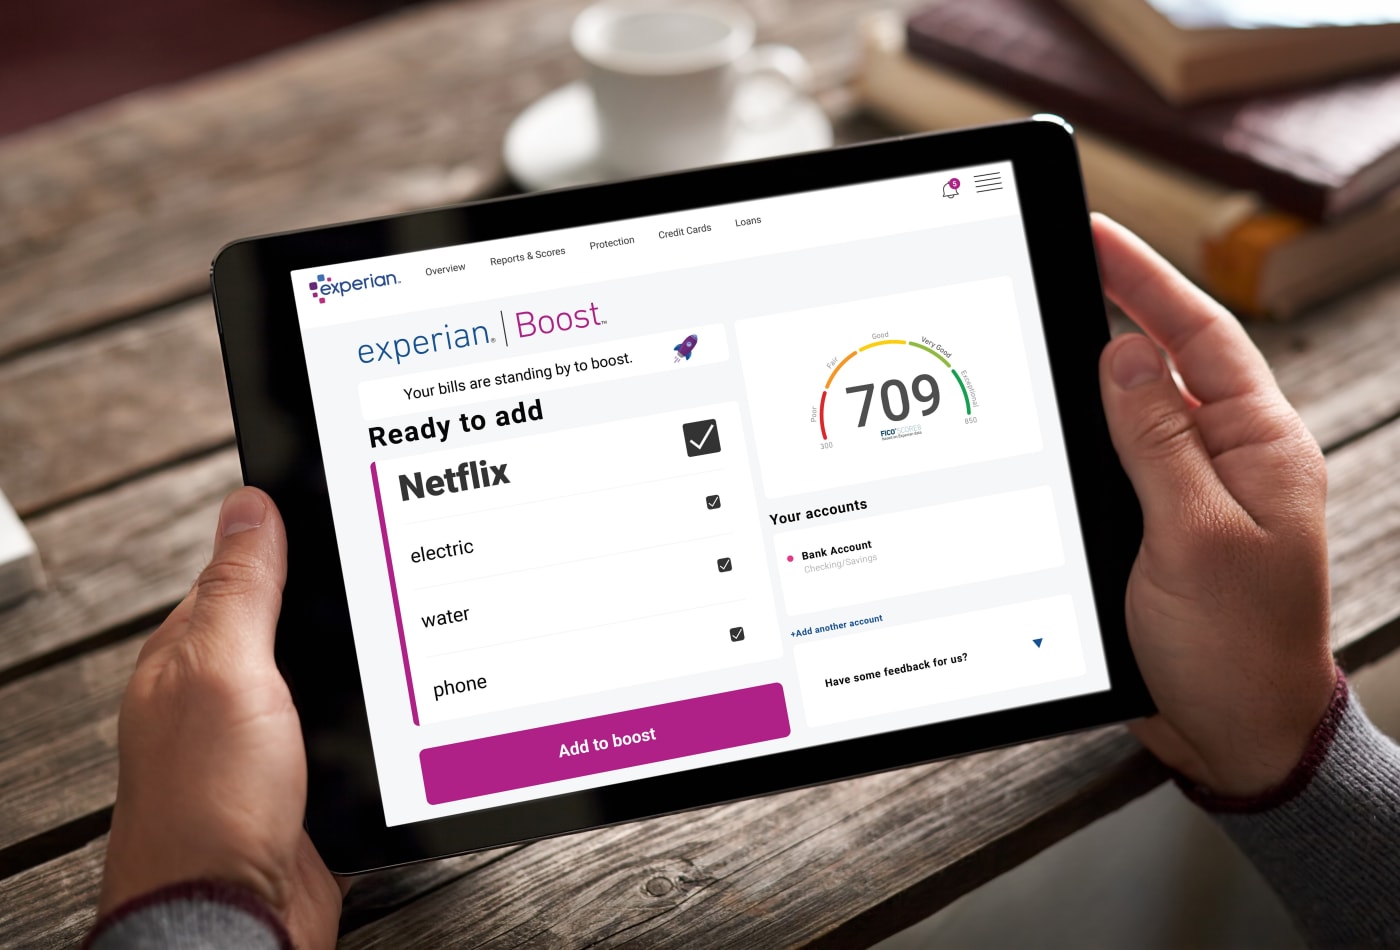 How Does Experian Boost Really Work?